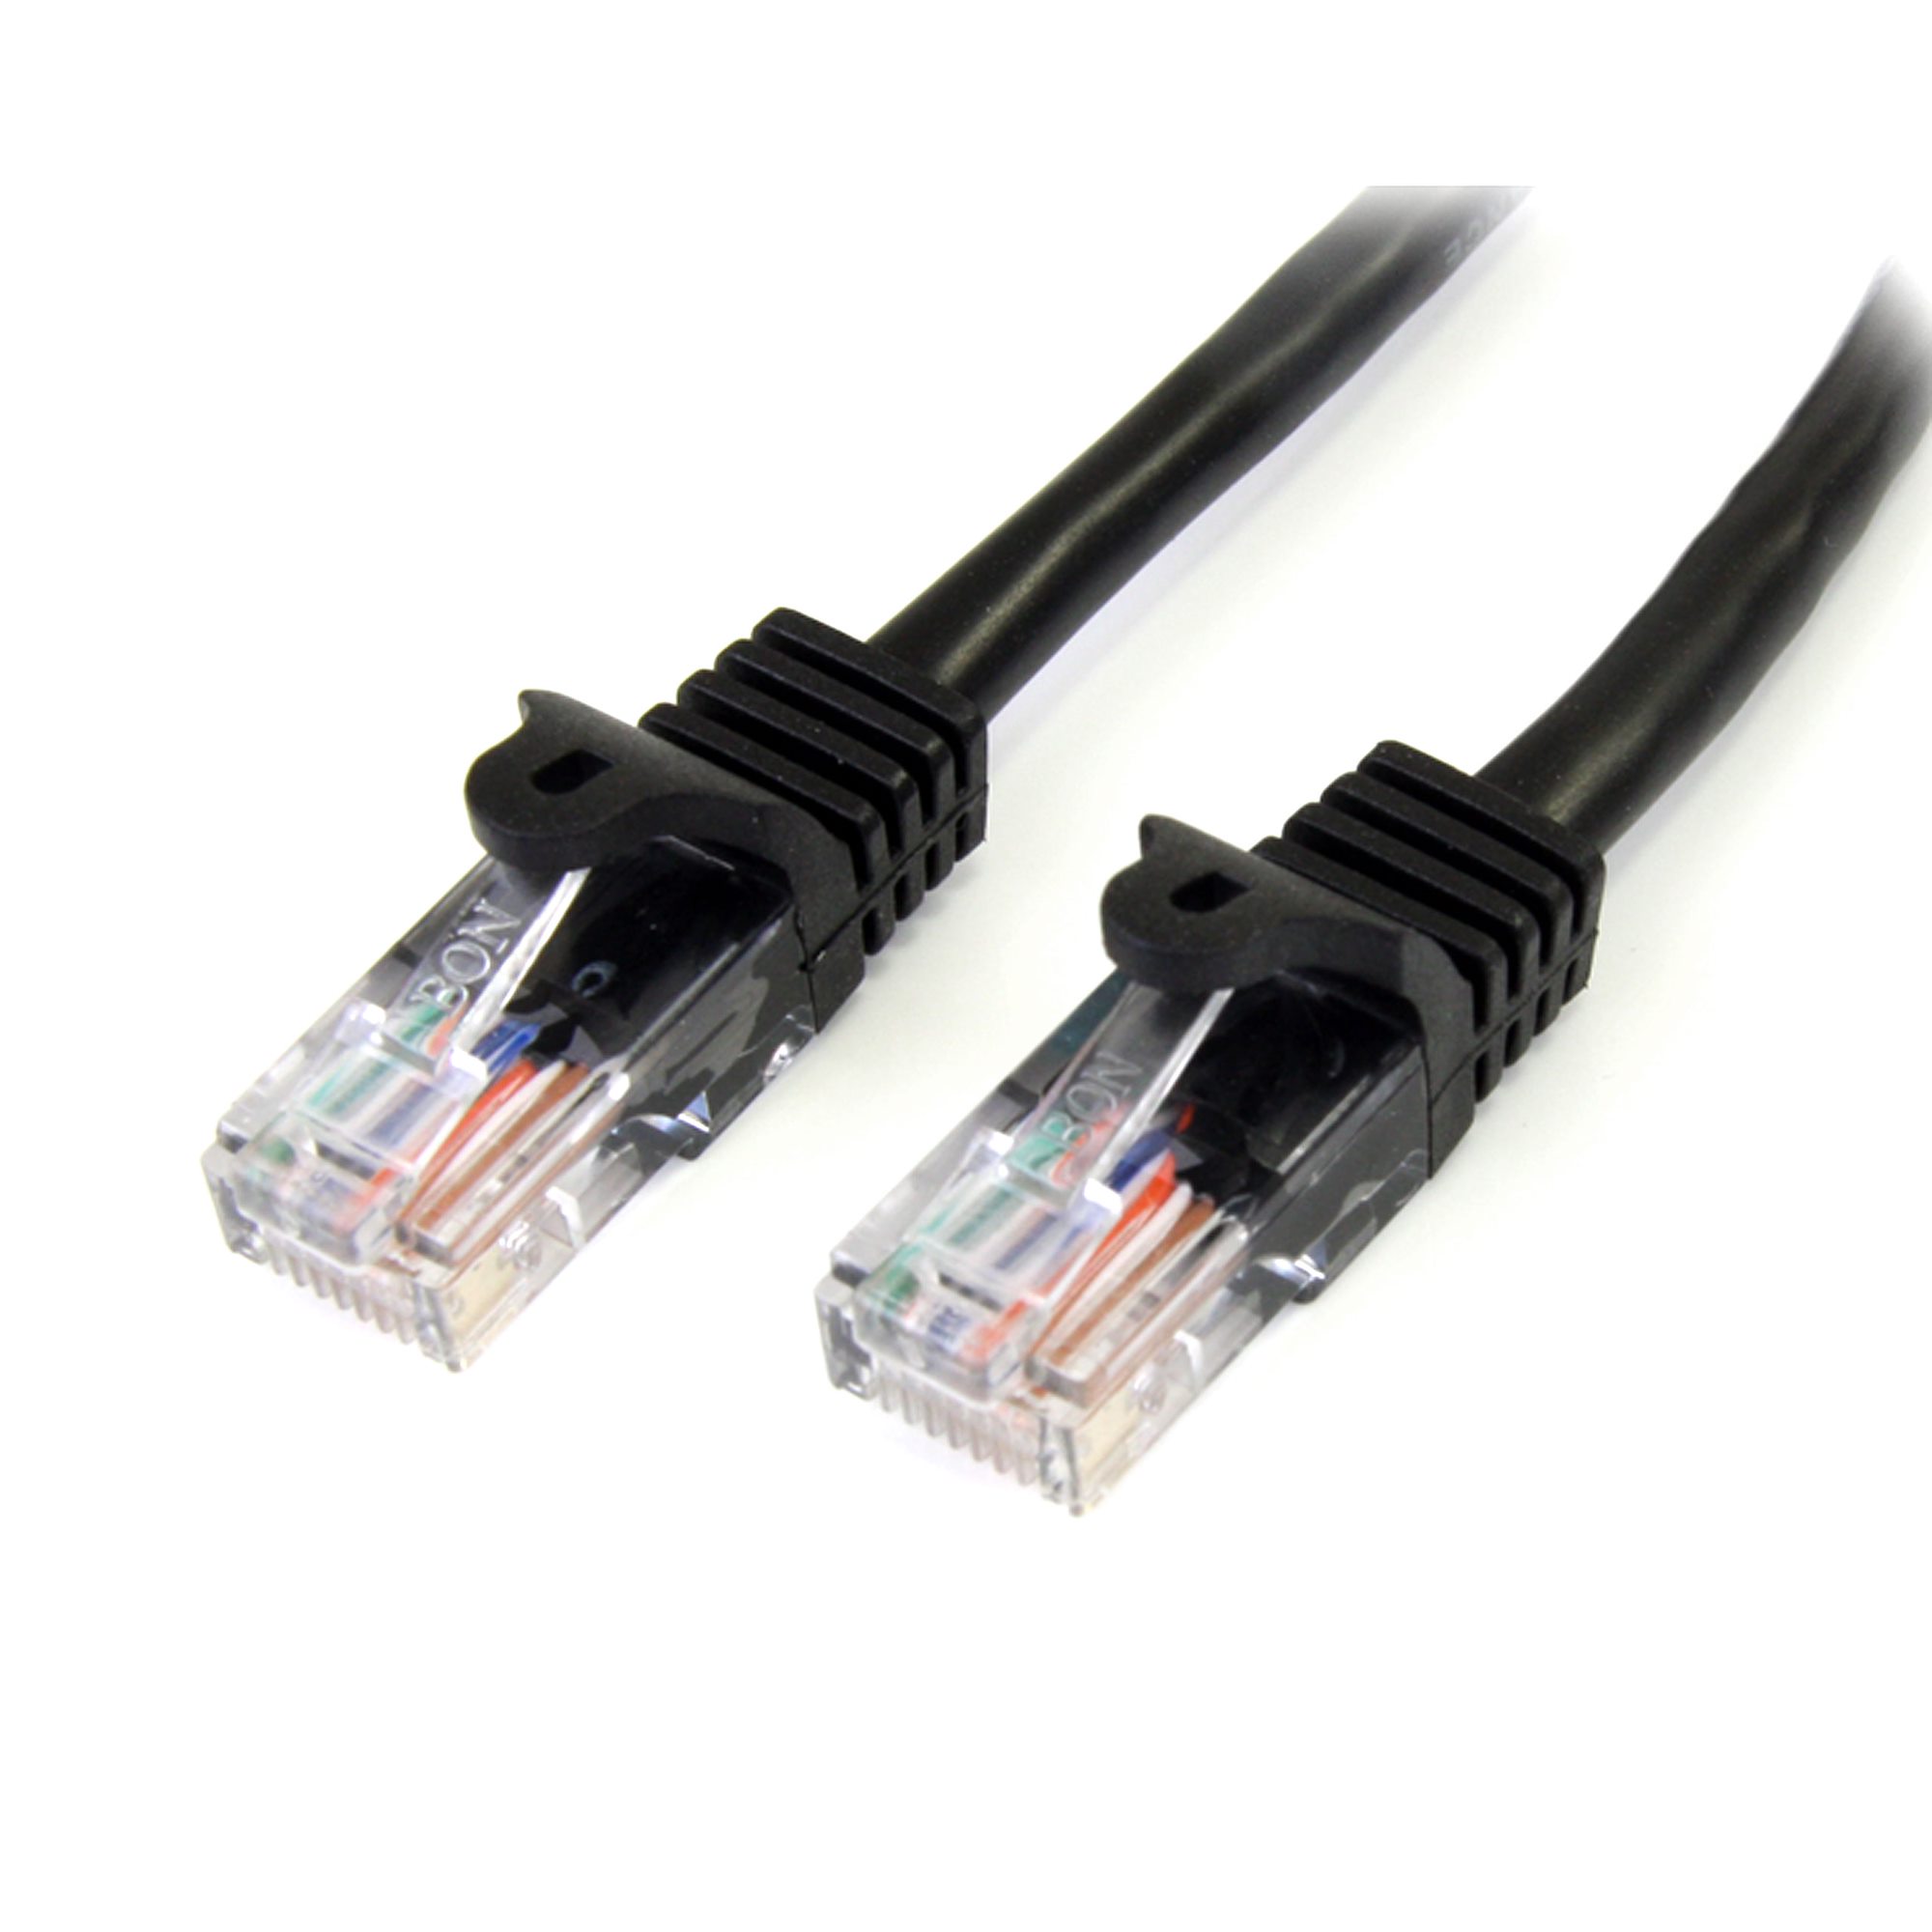 Premade Grey 100ft CAT5e Cross-Over LAN Ethernet RJ45 UTP Network Patch Cable 